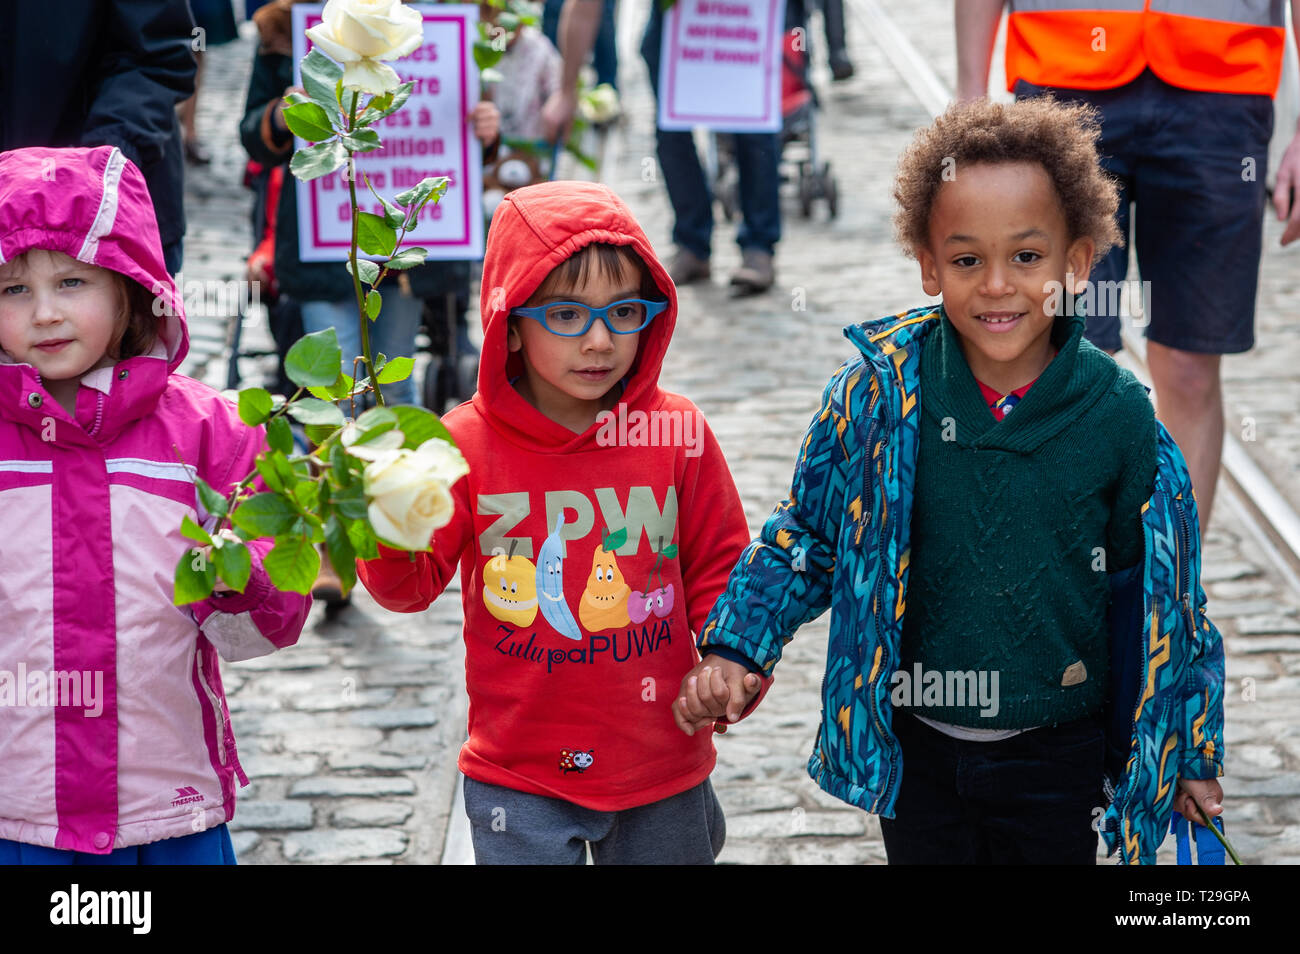 Kids are seen walking while holding a white rose during the March for Life in Brussels. Thousands of people gathered at the Poelaert during The 10th edition of the March for Life in Brussels, to defend the respect of human life from conception to natural death. The march was surrounded by a lot of police because of the pro-abortion demonstration that also took place closer to the march. Stock Photo